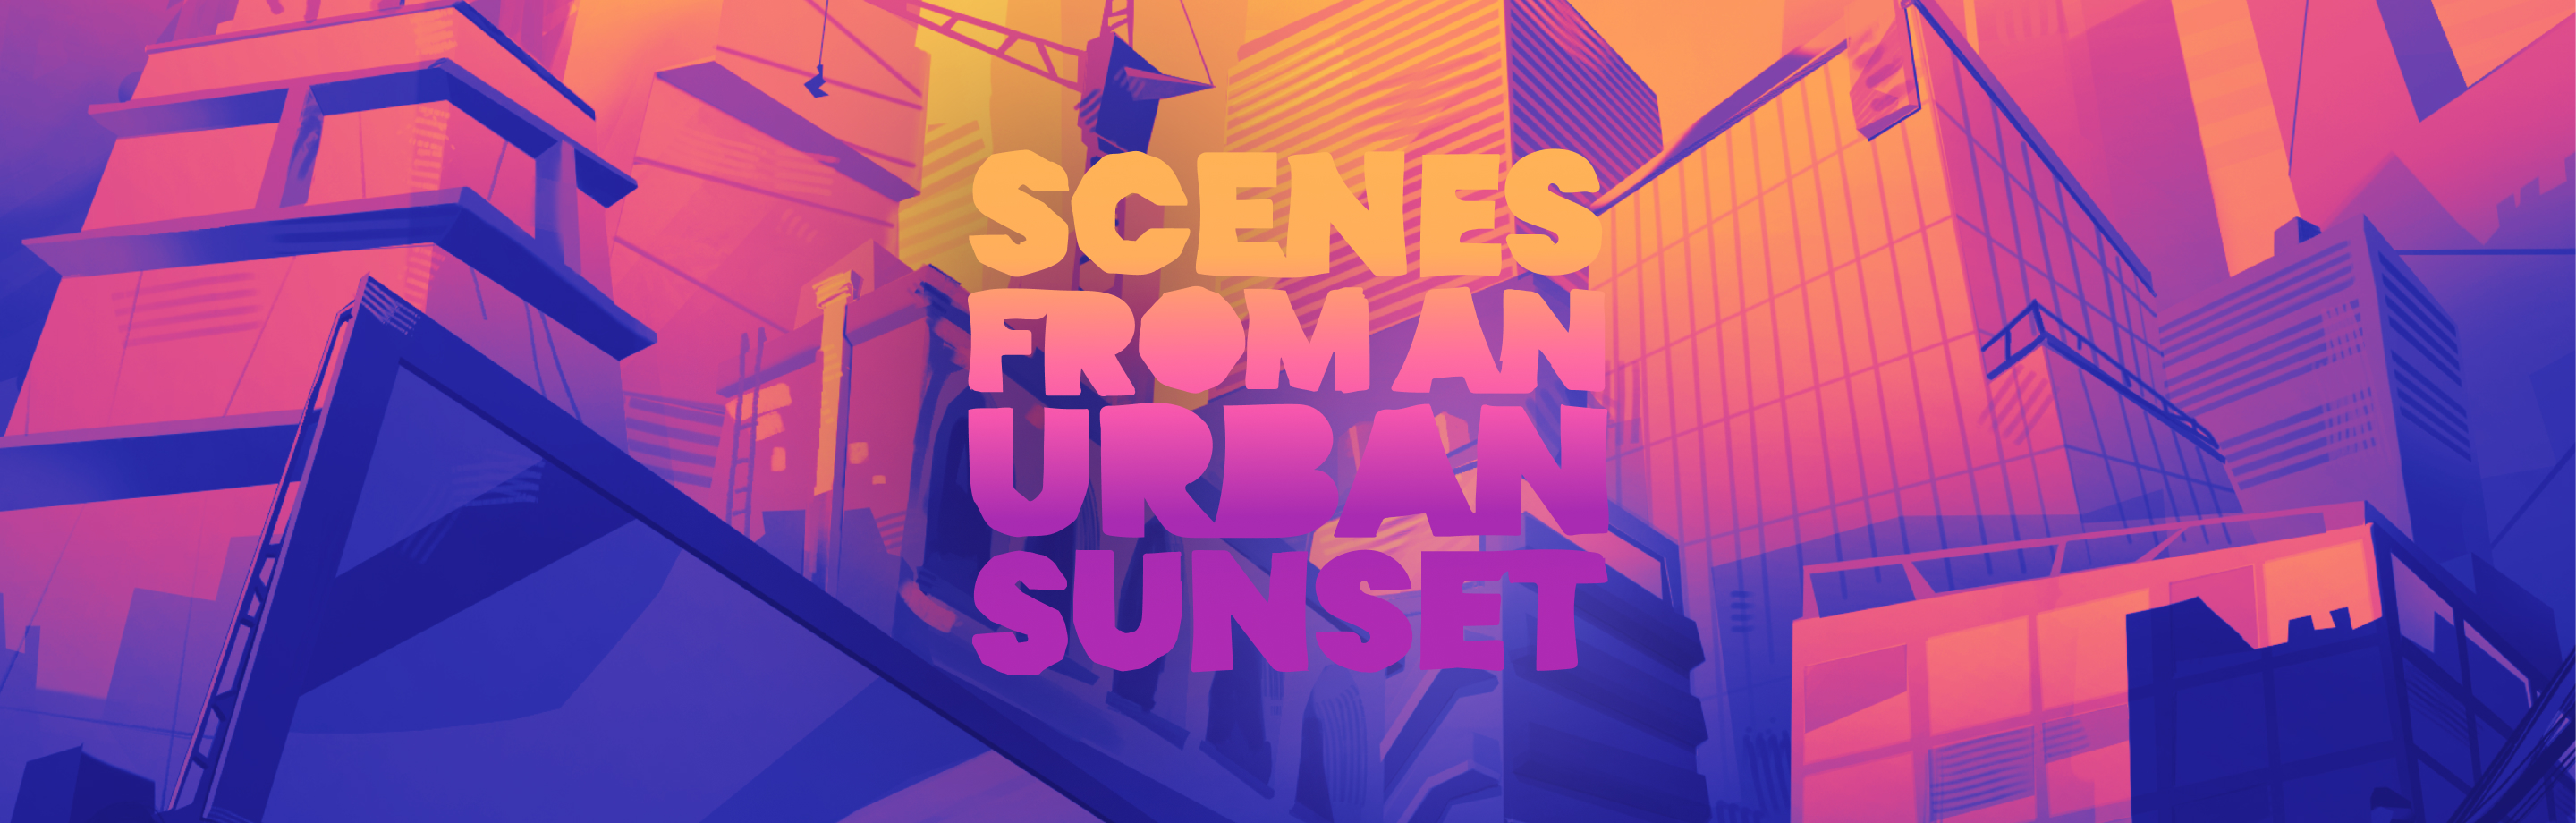 Scenes from an Urban Sunset project cover